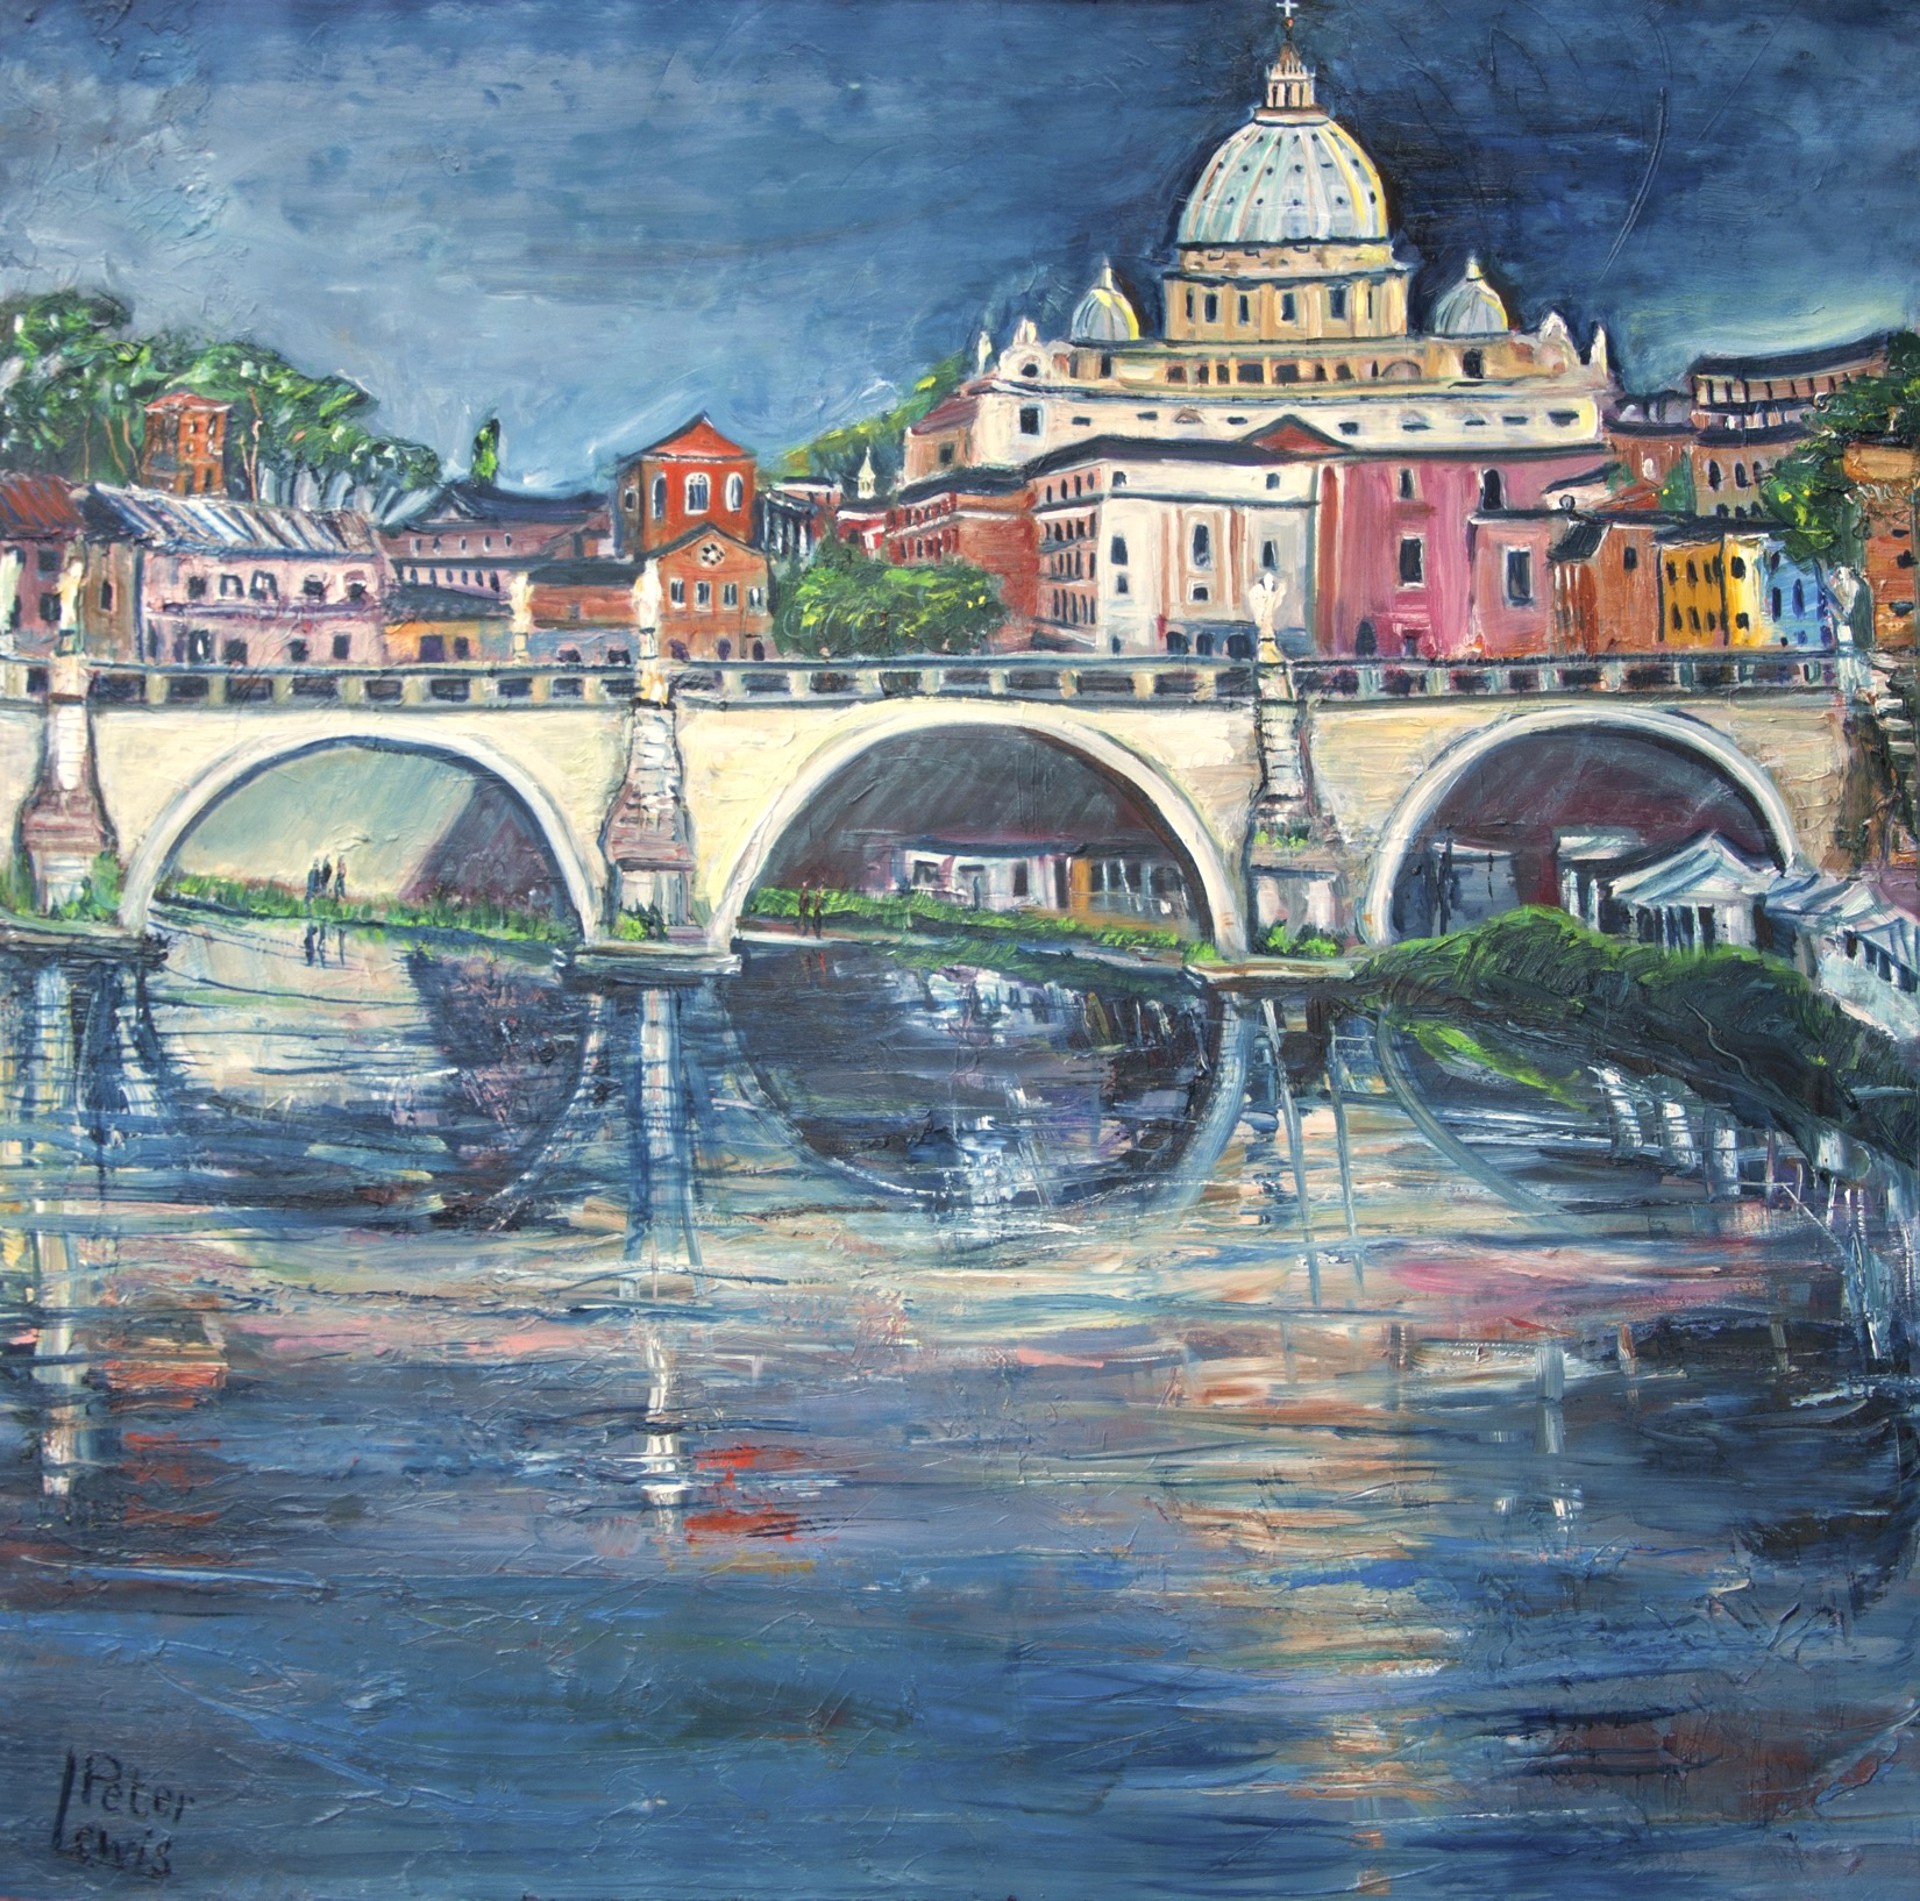 St. Peter’s Basilica Over Tibor River, Rome by Peter Lewis